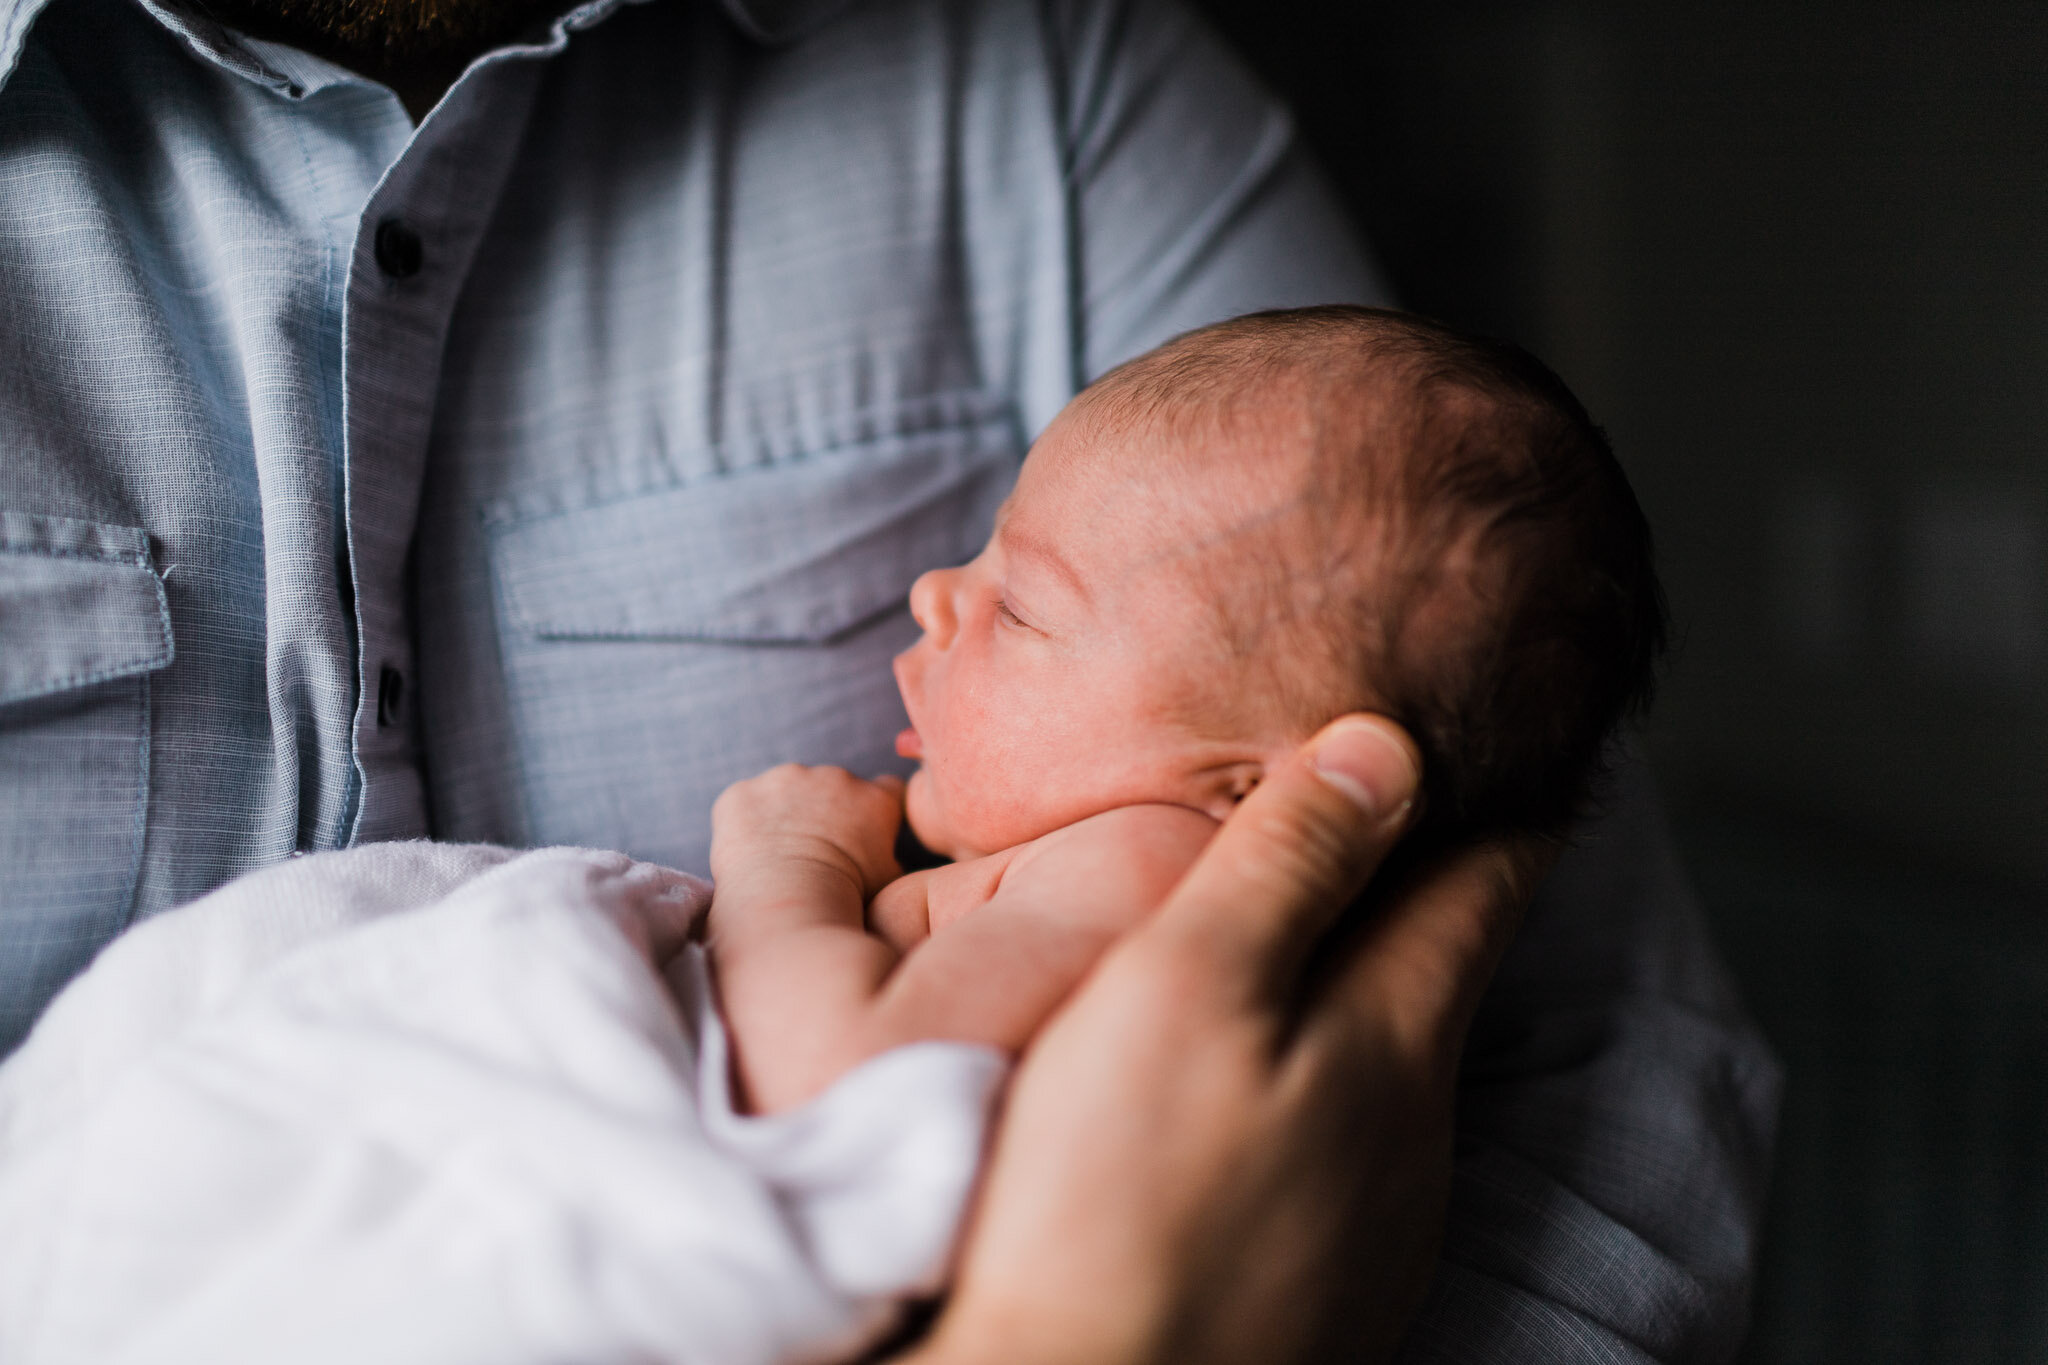 Raleigh Newborn Photographer | By G. Lin Photography | Father cradling baby daughter in his arms